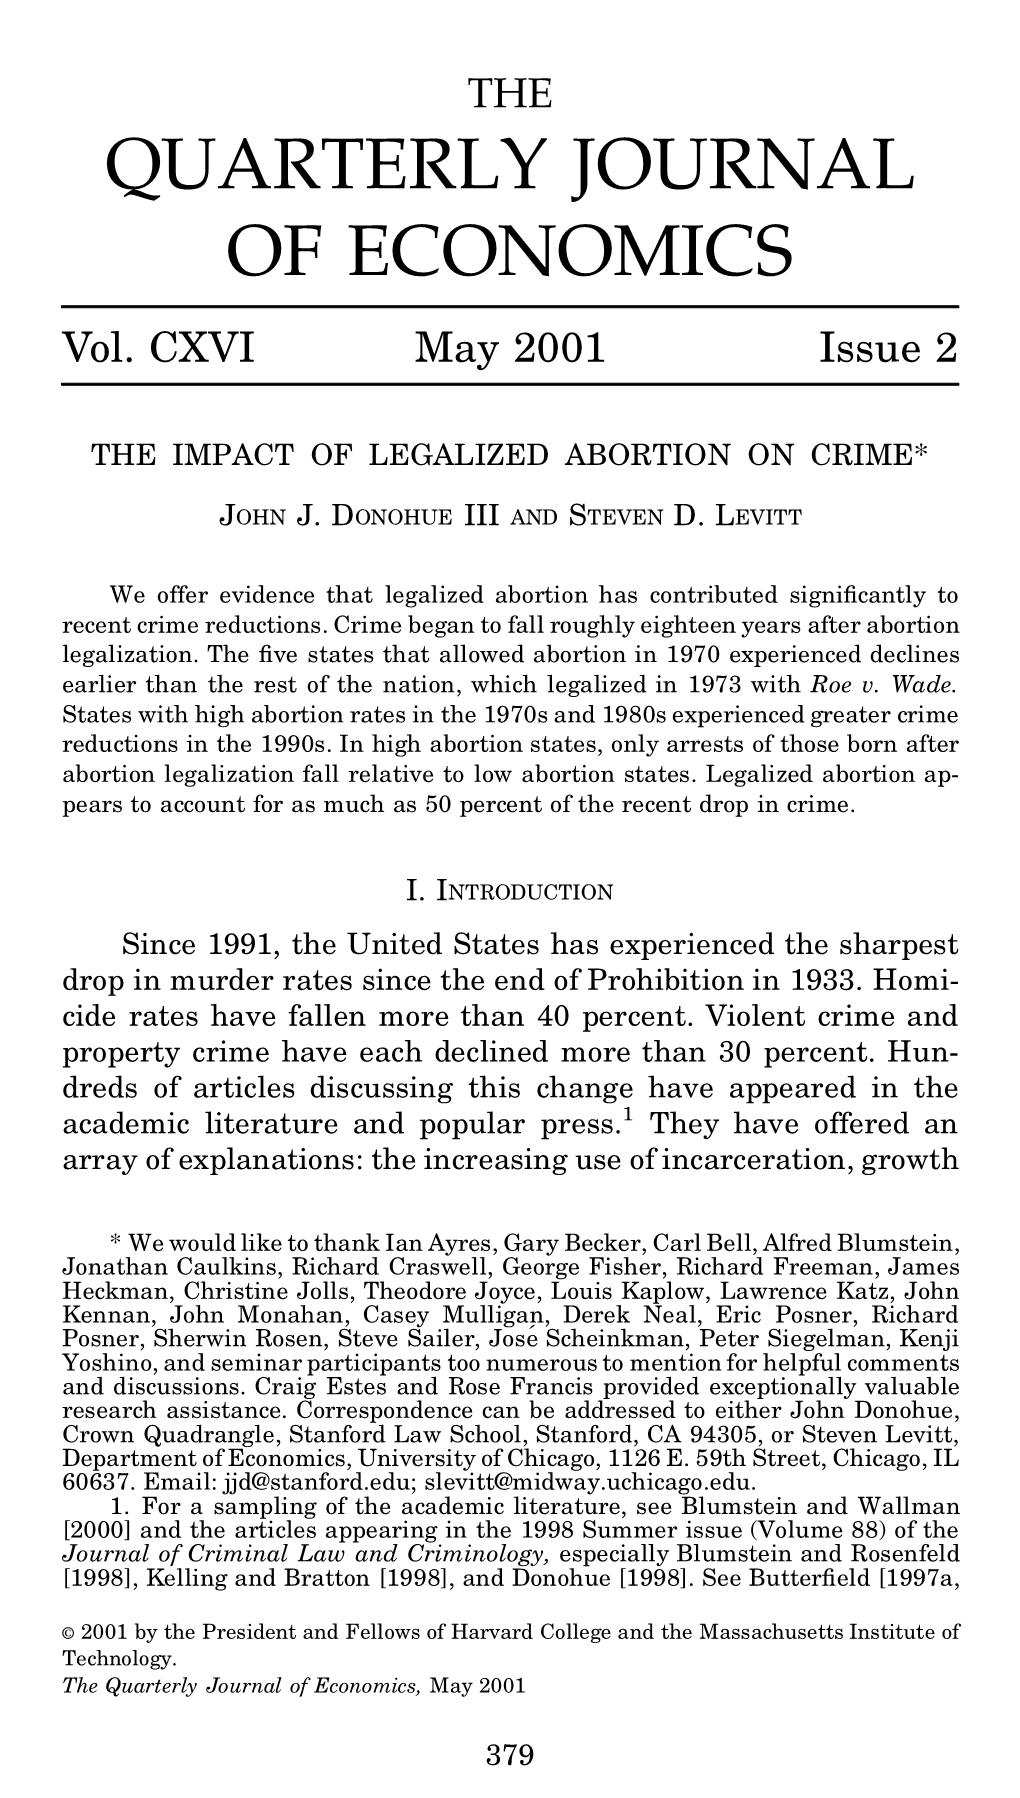 The Impact of Legalized Abortion on Crime